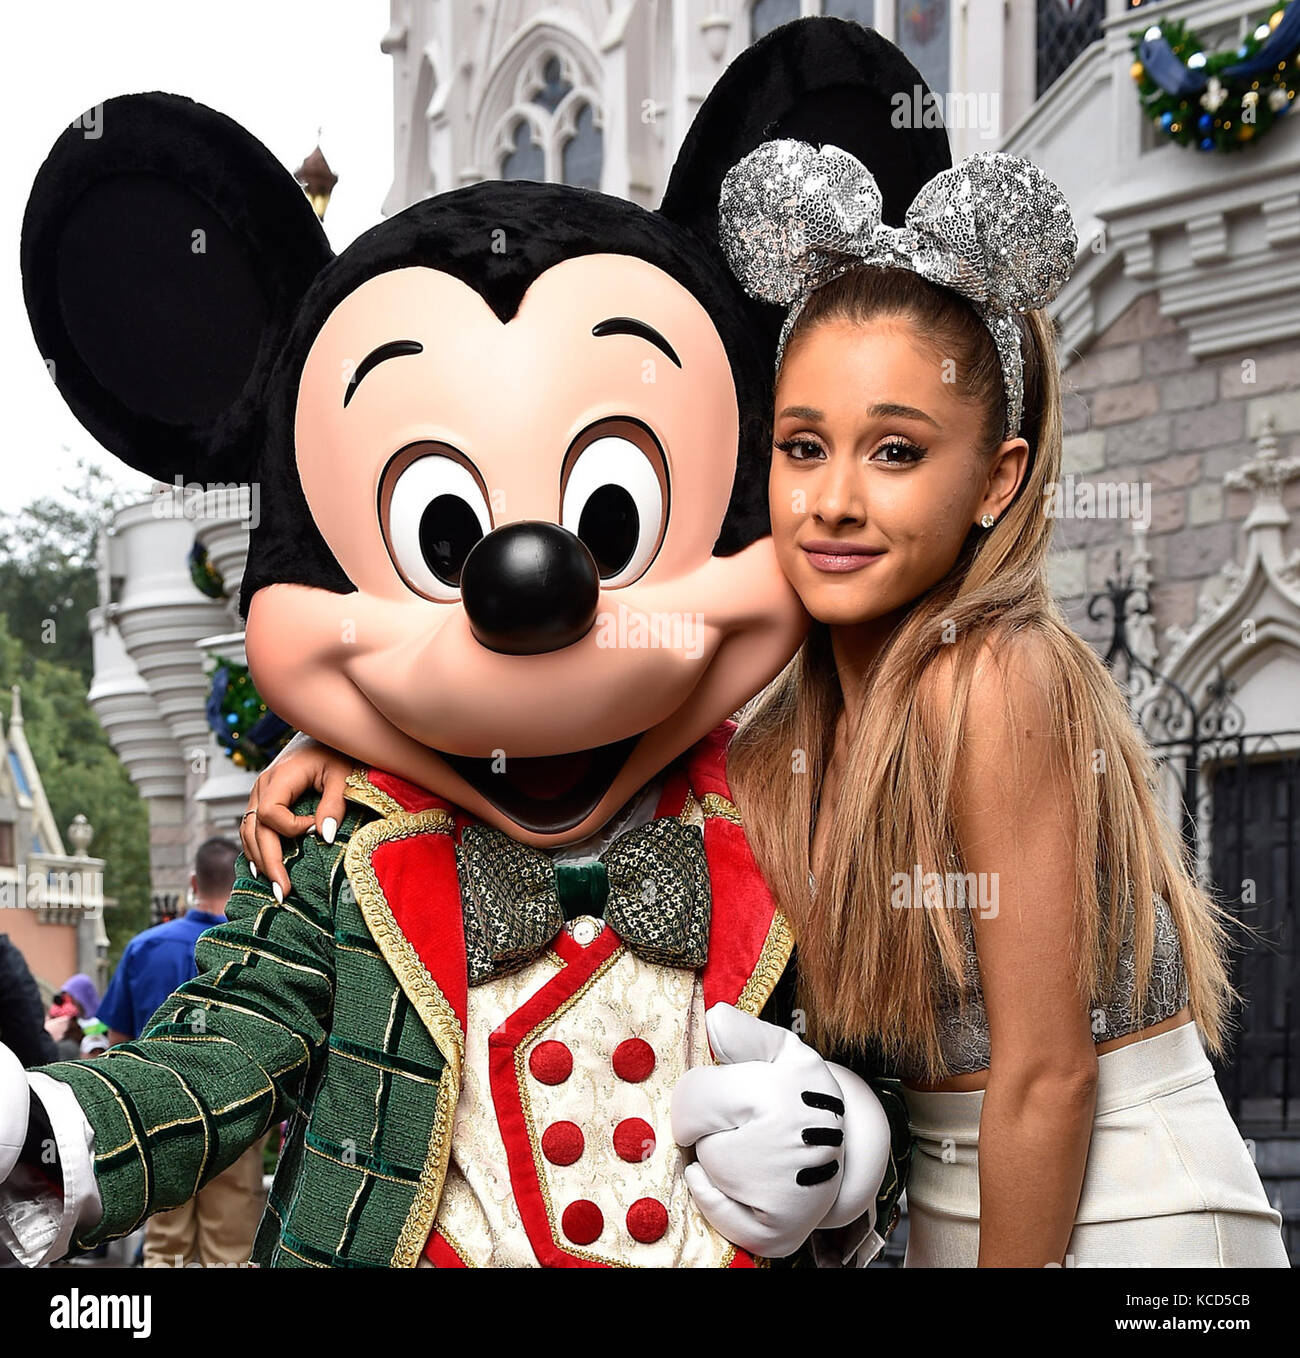 LAKE BUENA VISTA, FL - DECEMBER 09:  Ariana Grande at the taping of the Disney Parks 'Frozen Christmas Celebration' TV Special in the Magic Kingdom Park at the Walt Disney World Resort on December 9, 2014 in Lake Buena Vista, Florida.  People:  Ariana Grande  Transmission Ref:  FLXX  Credit: Hoo-Me.com/MediaPunch Stock Photo